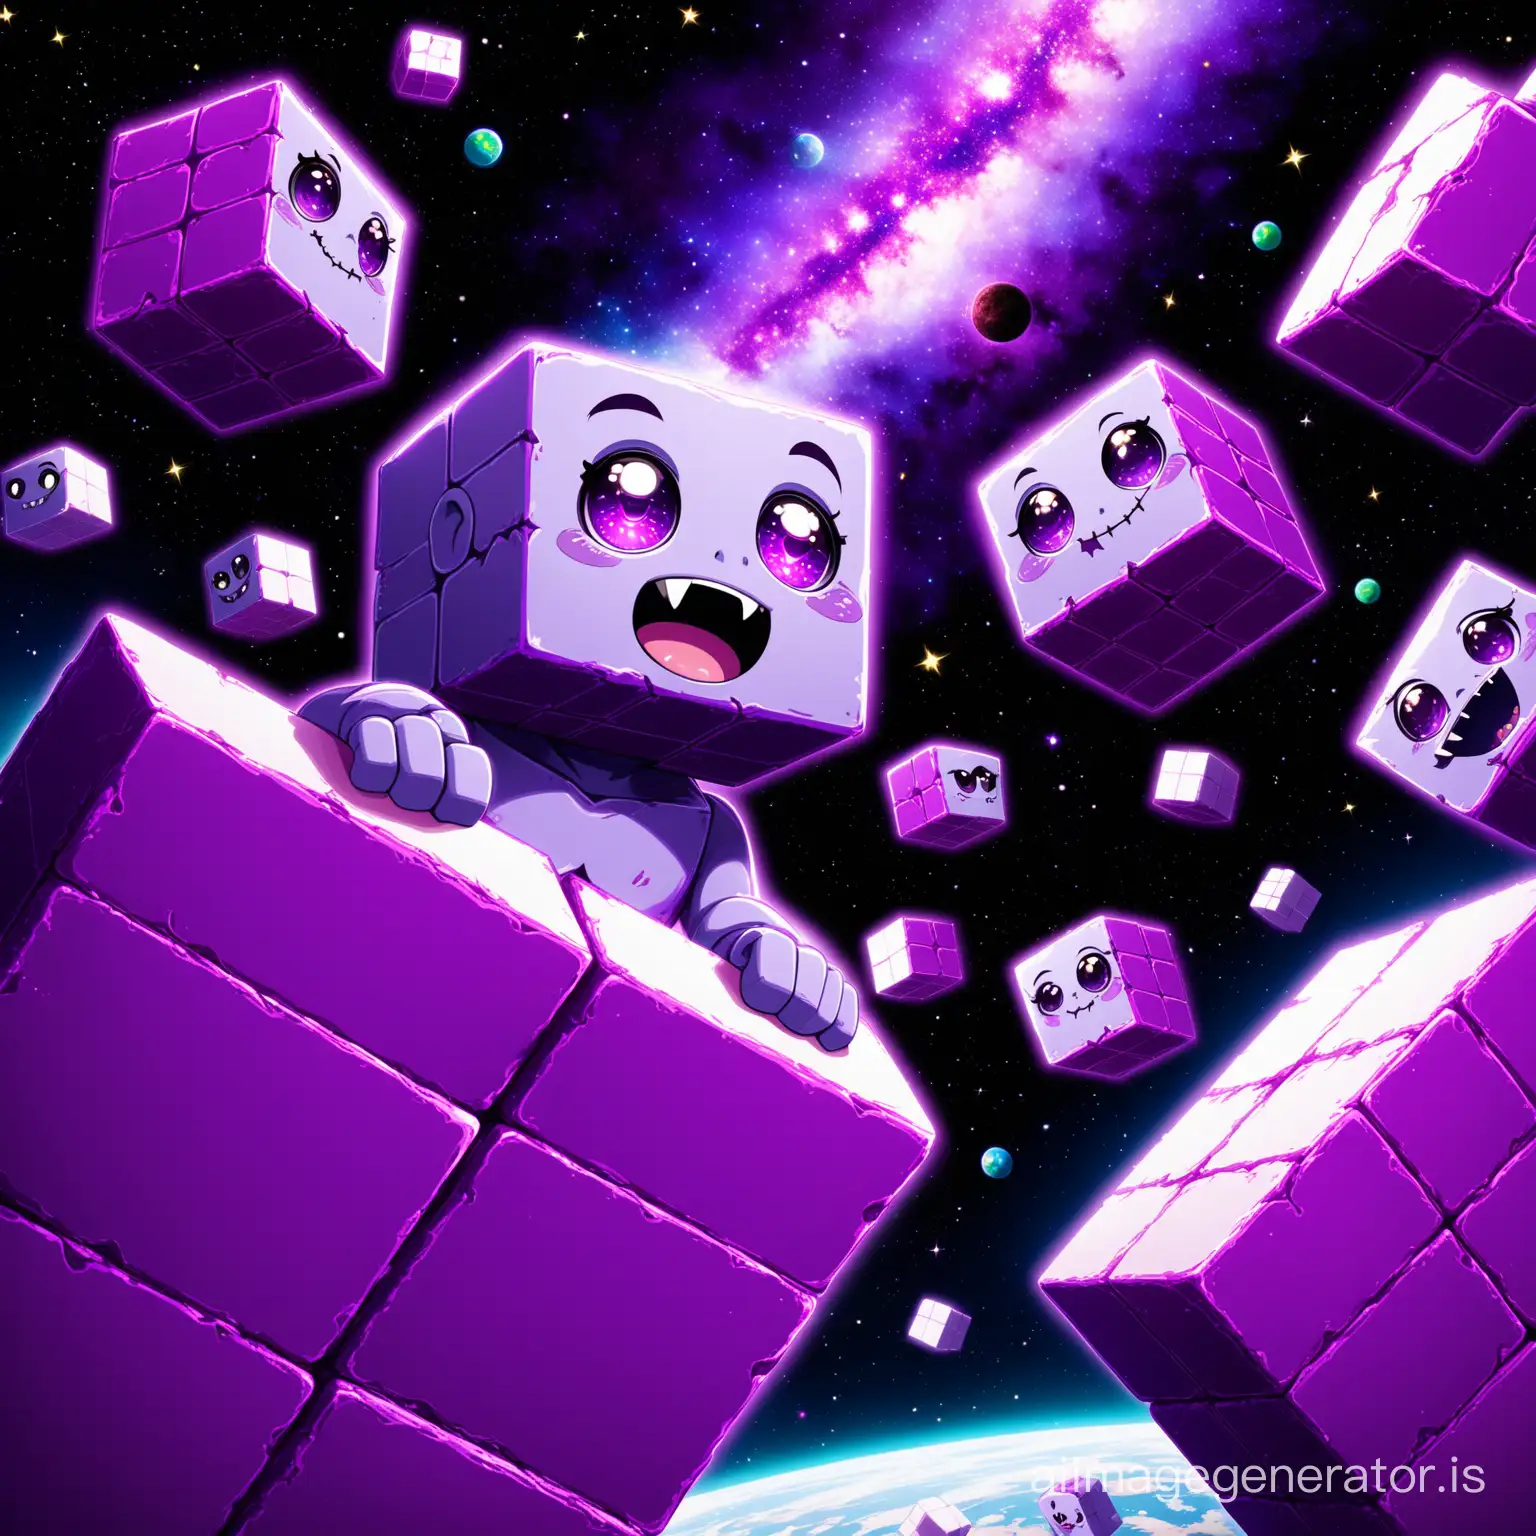 A little happy cute purple zombie blocks with purple eye and smile in space with super detail and High Quality
big and purple blocks and floating are seen everywhere
Details are evident beautifully and with great precision